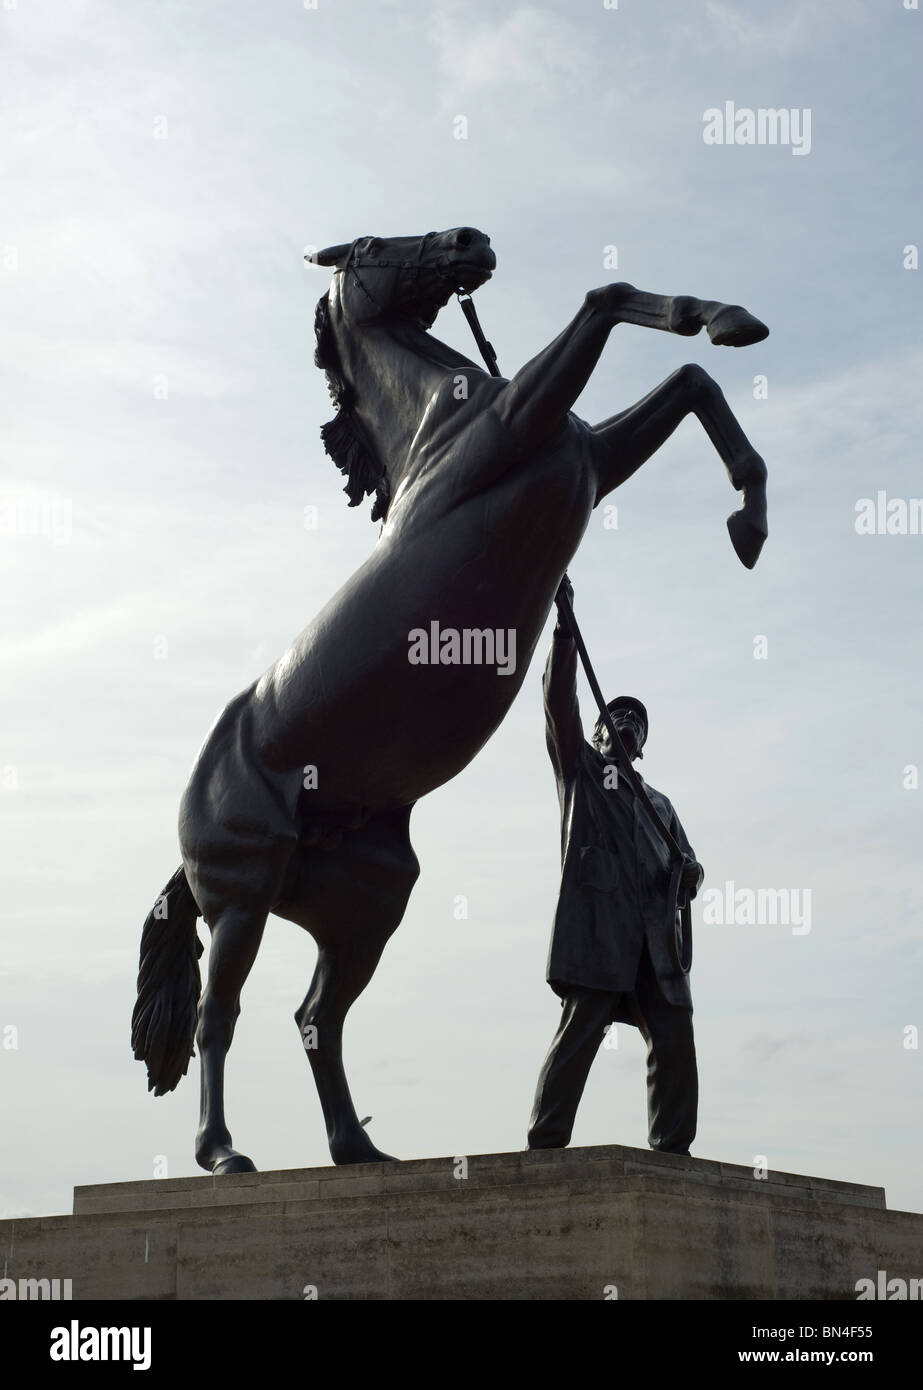 A black statue of a horse standing on it's hind legs rearing up with its handler holding the reins. Photo by Matt Kirwan. Stock Photo